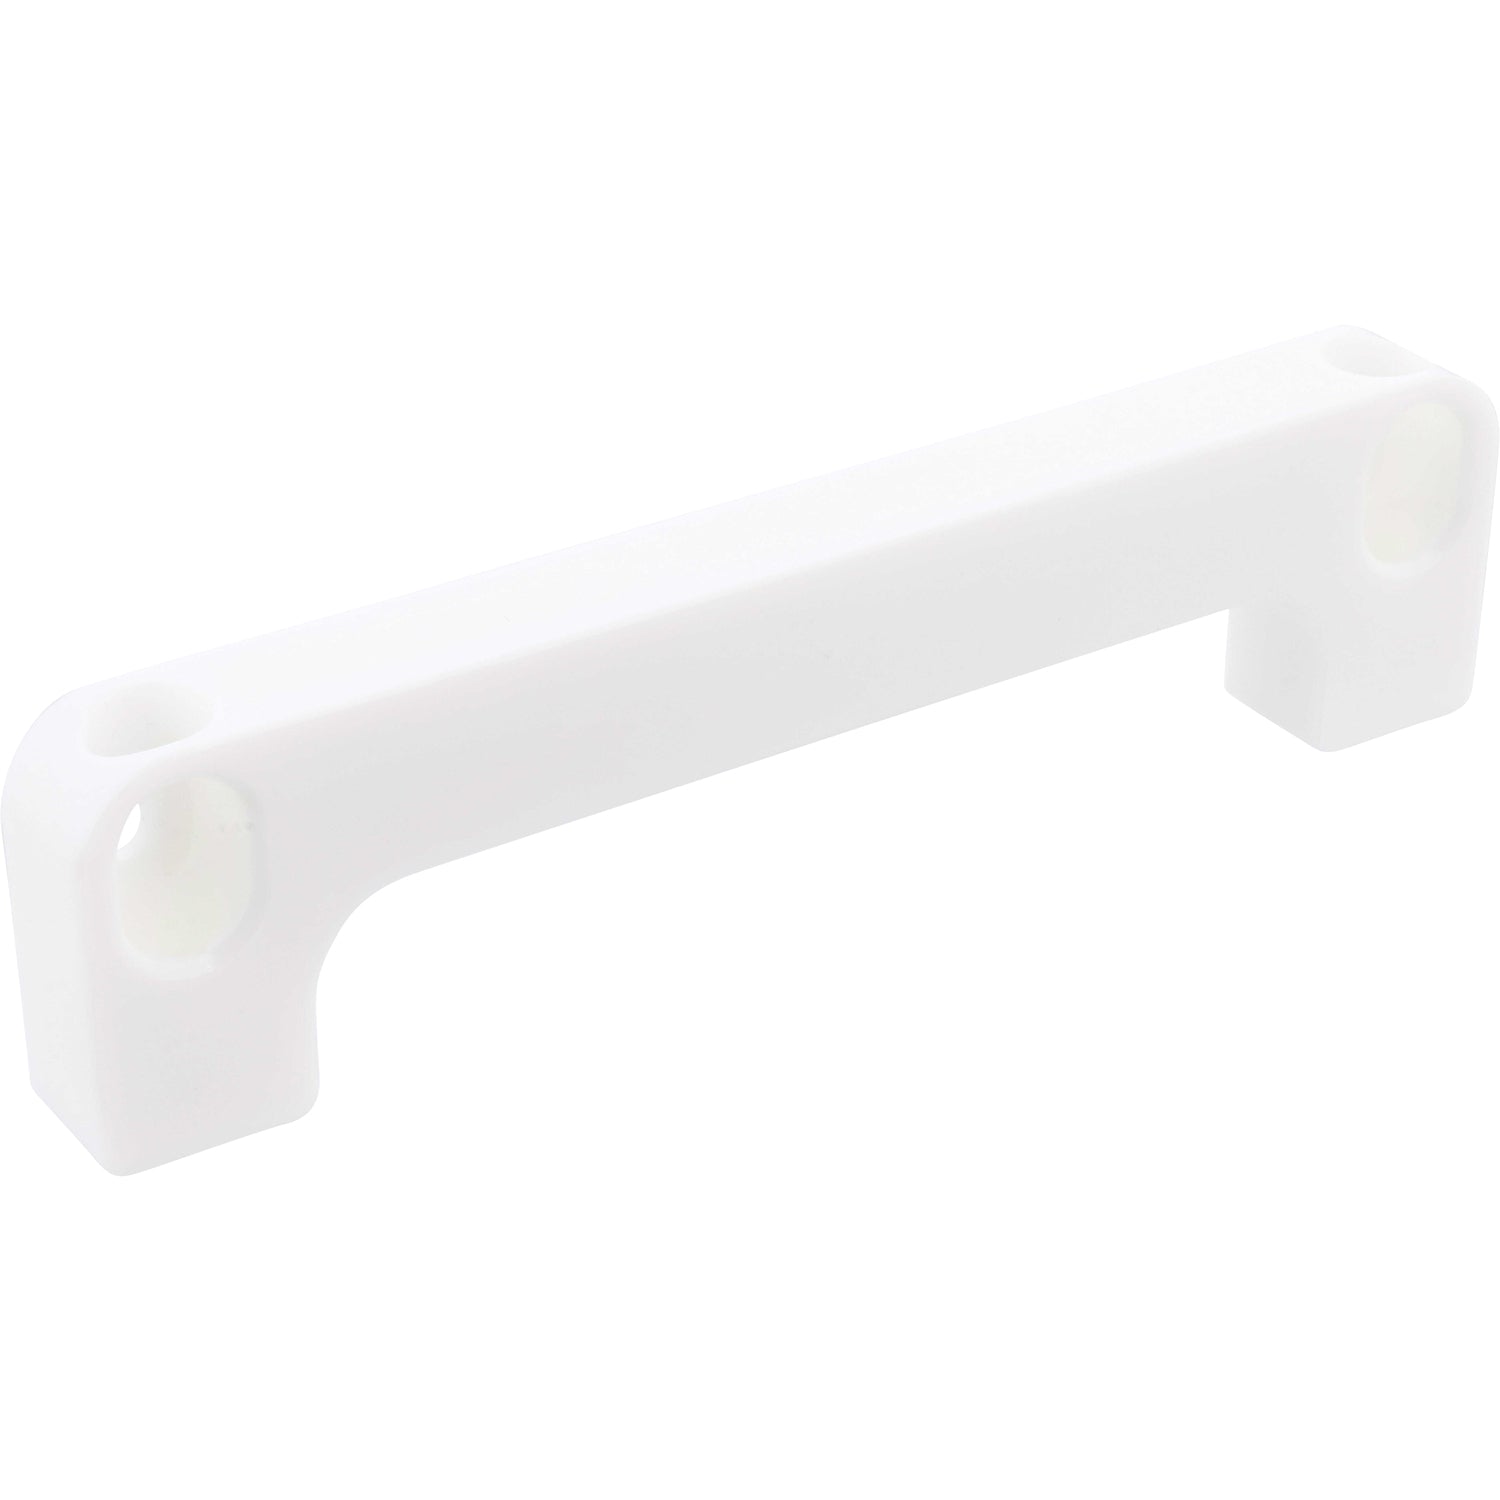 White plastic mounting bracket shaped like a shallow U with two holes used for mounting. Shown on white background.